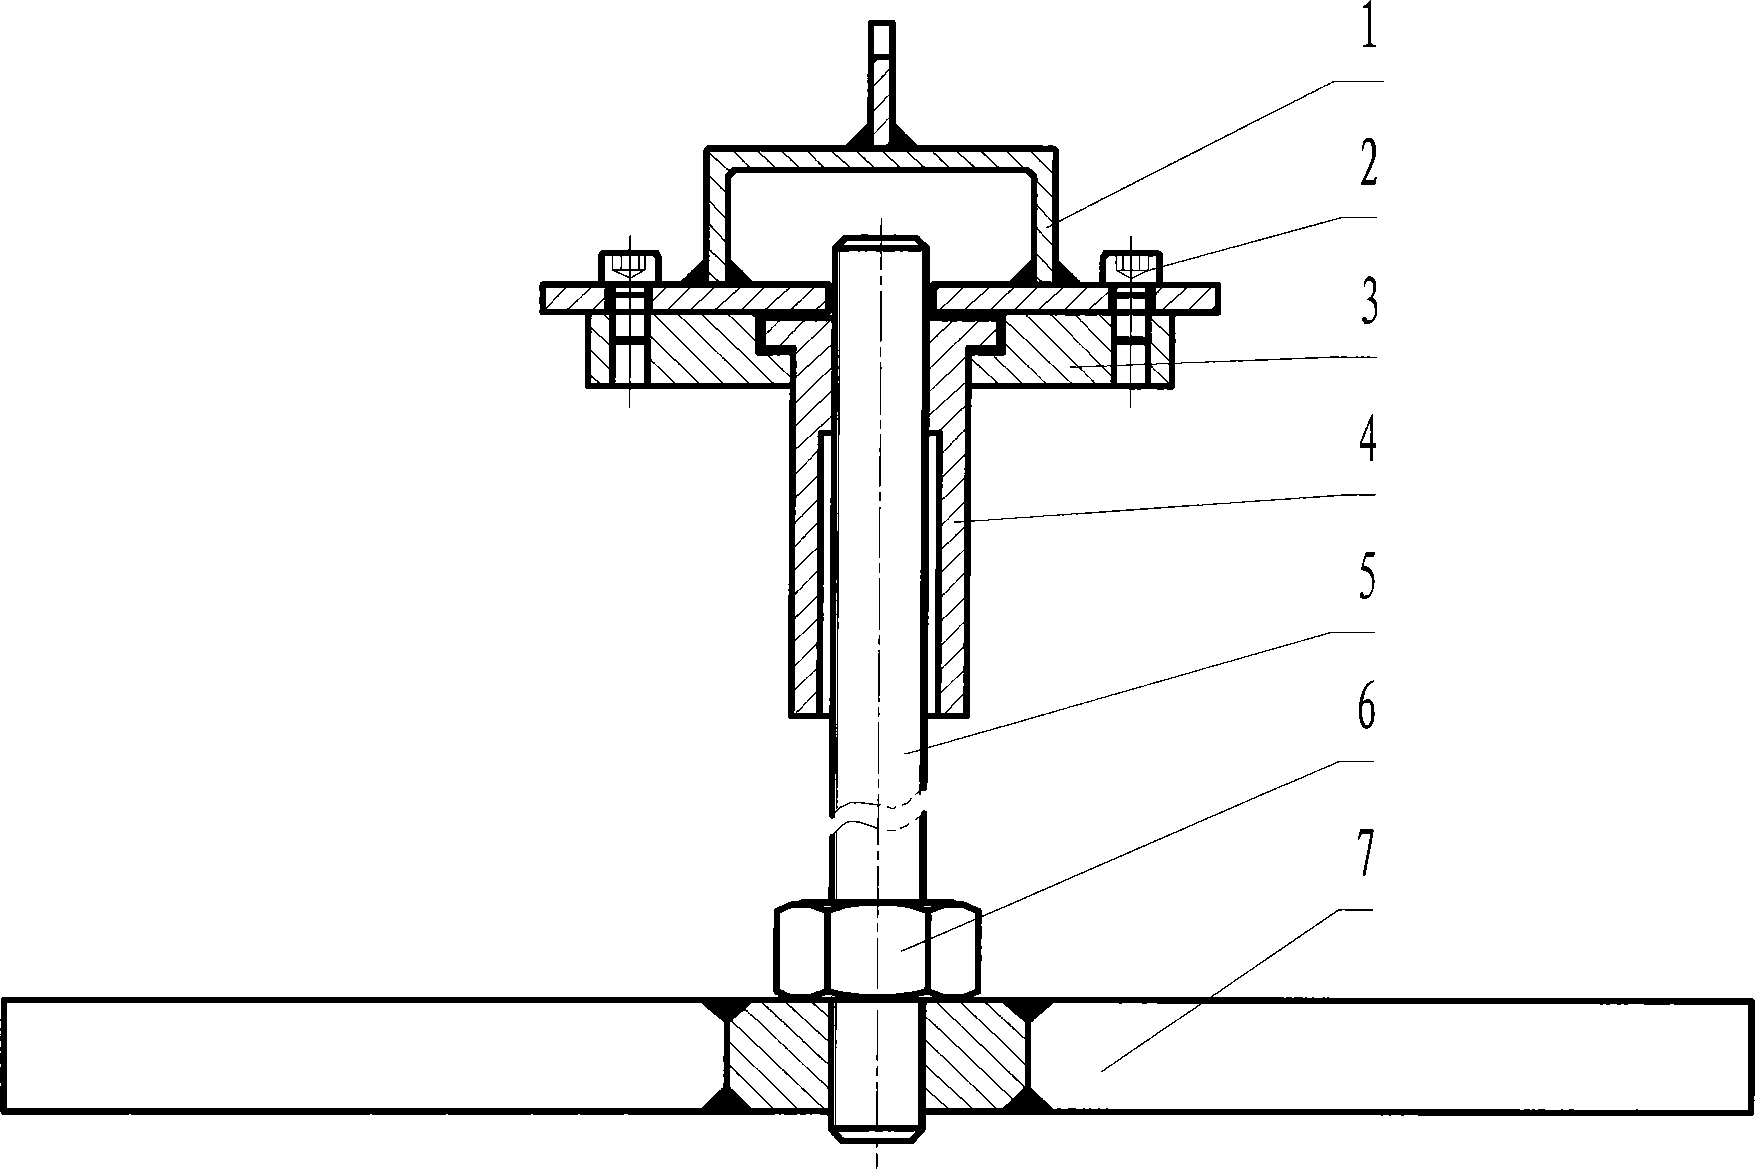 Support positioning device for outside micrometer measurement